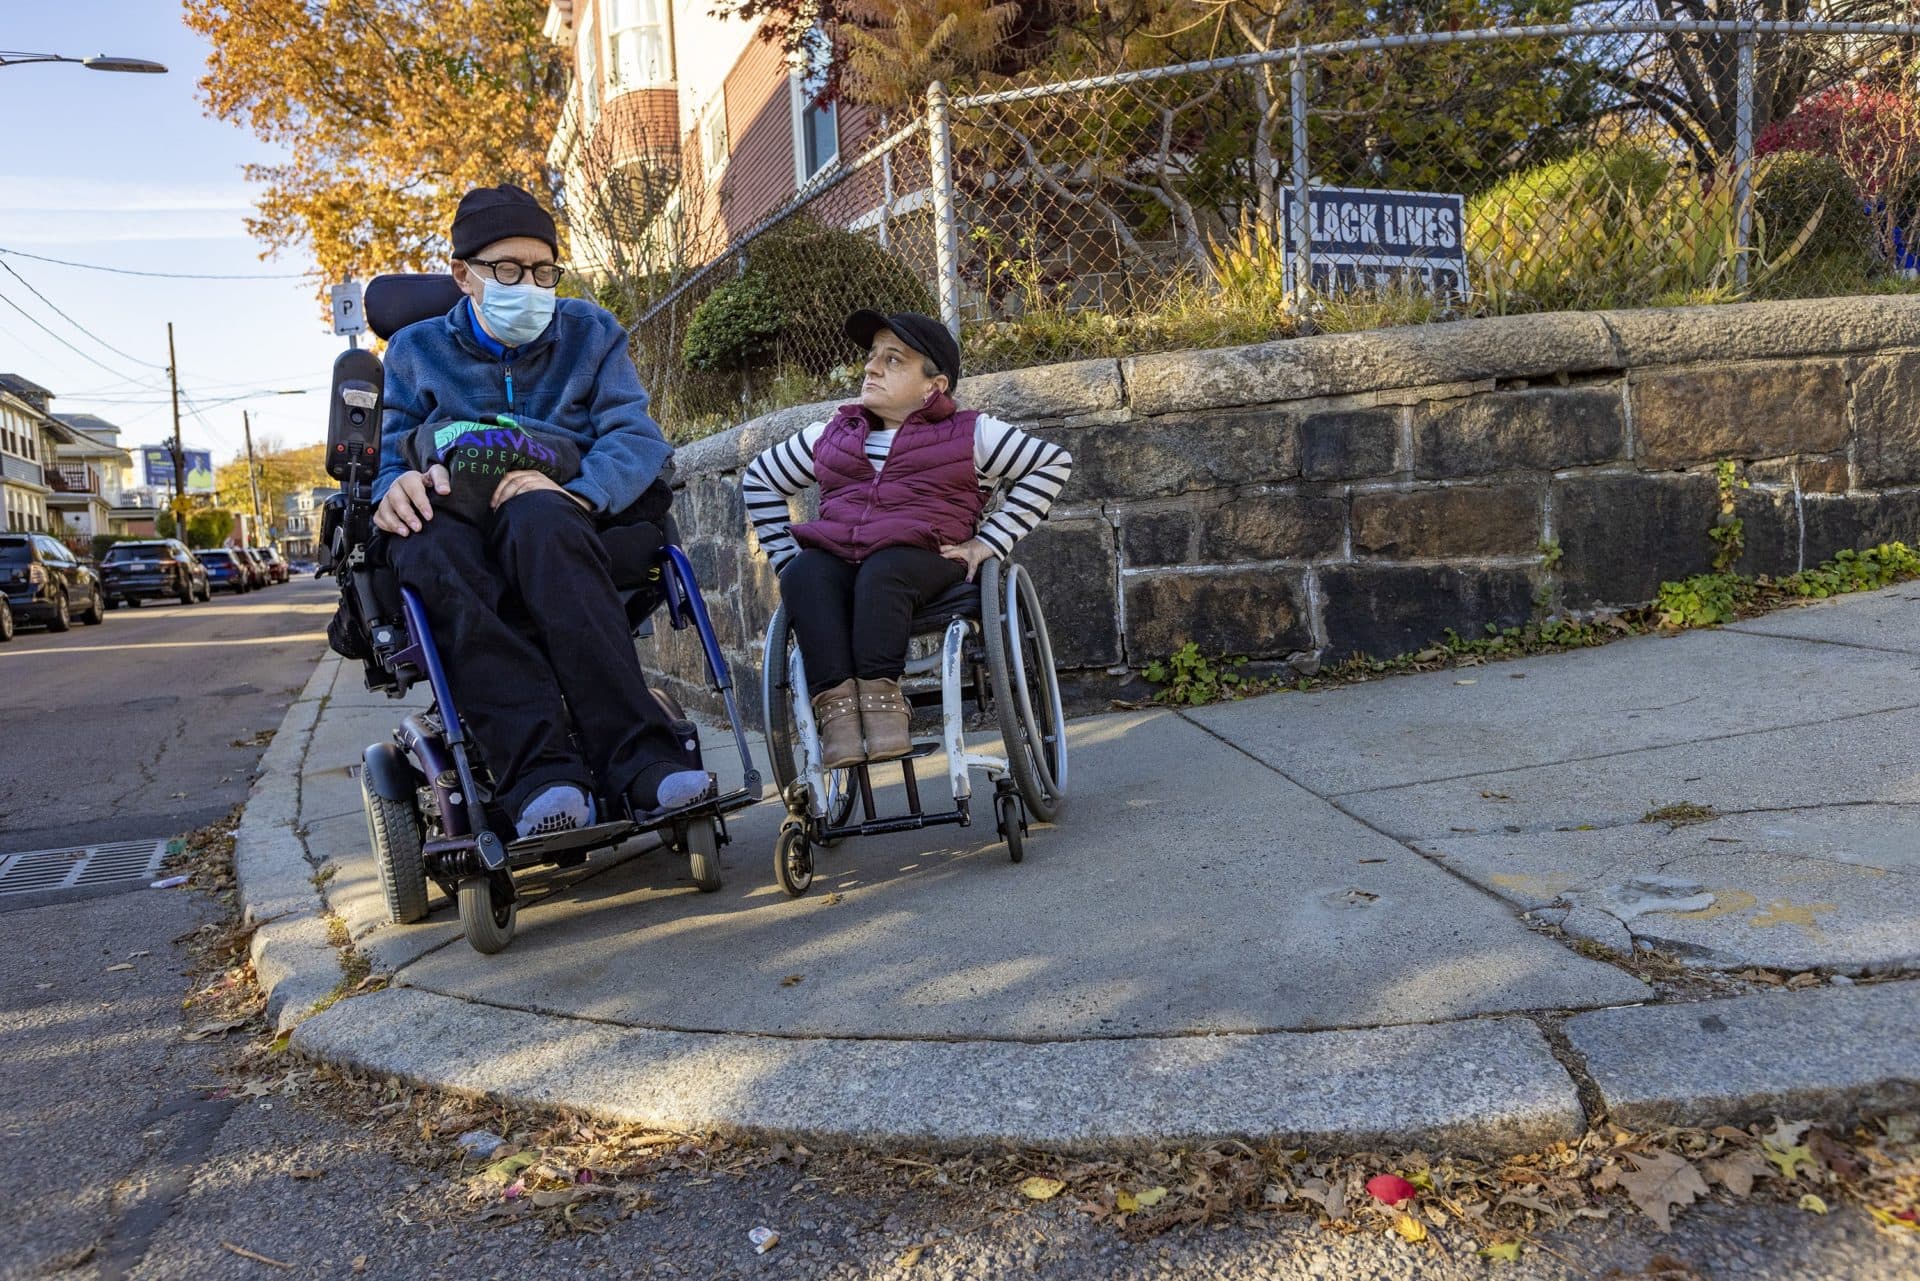 Michael Muehe and Colleen Flanagan sit at the edge of a sidewalk with no curb ramp on the corner of Boylston Street and Belmore Terrace in Jamaica Plain. (Jesse Costa/WBUR)